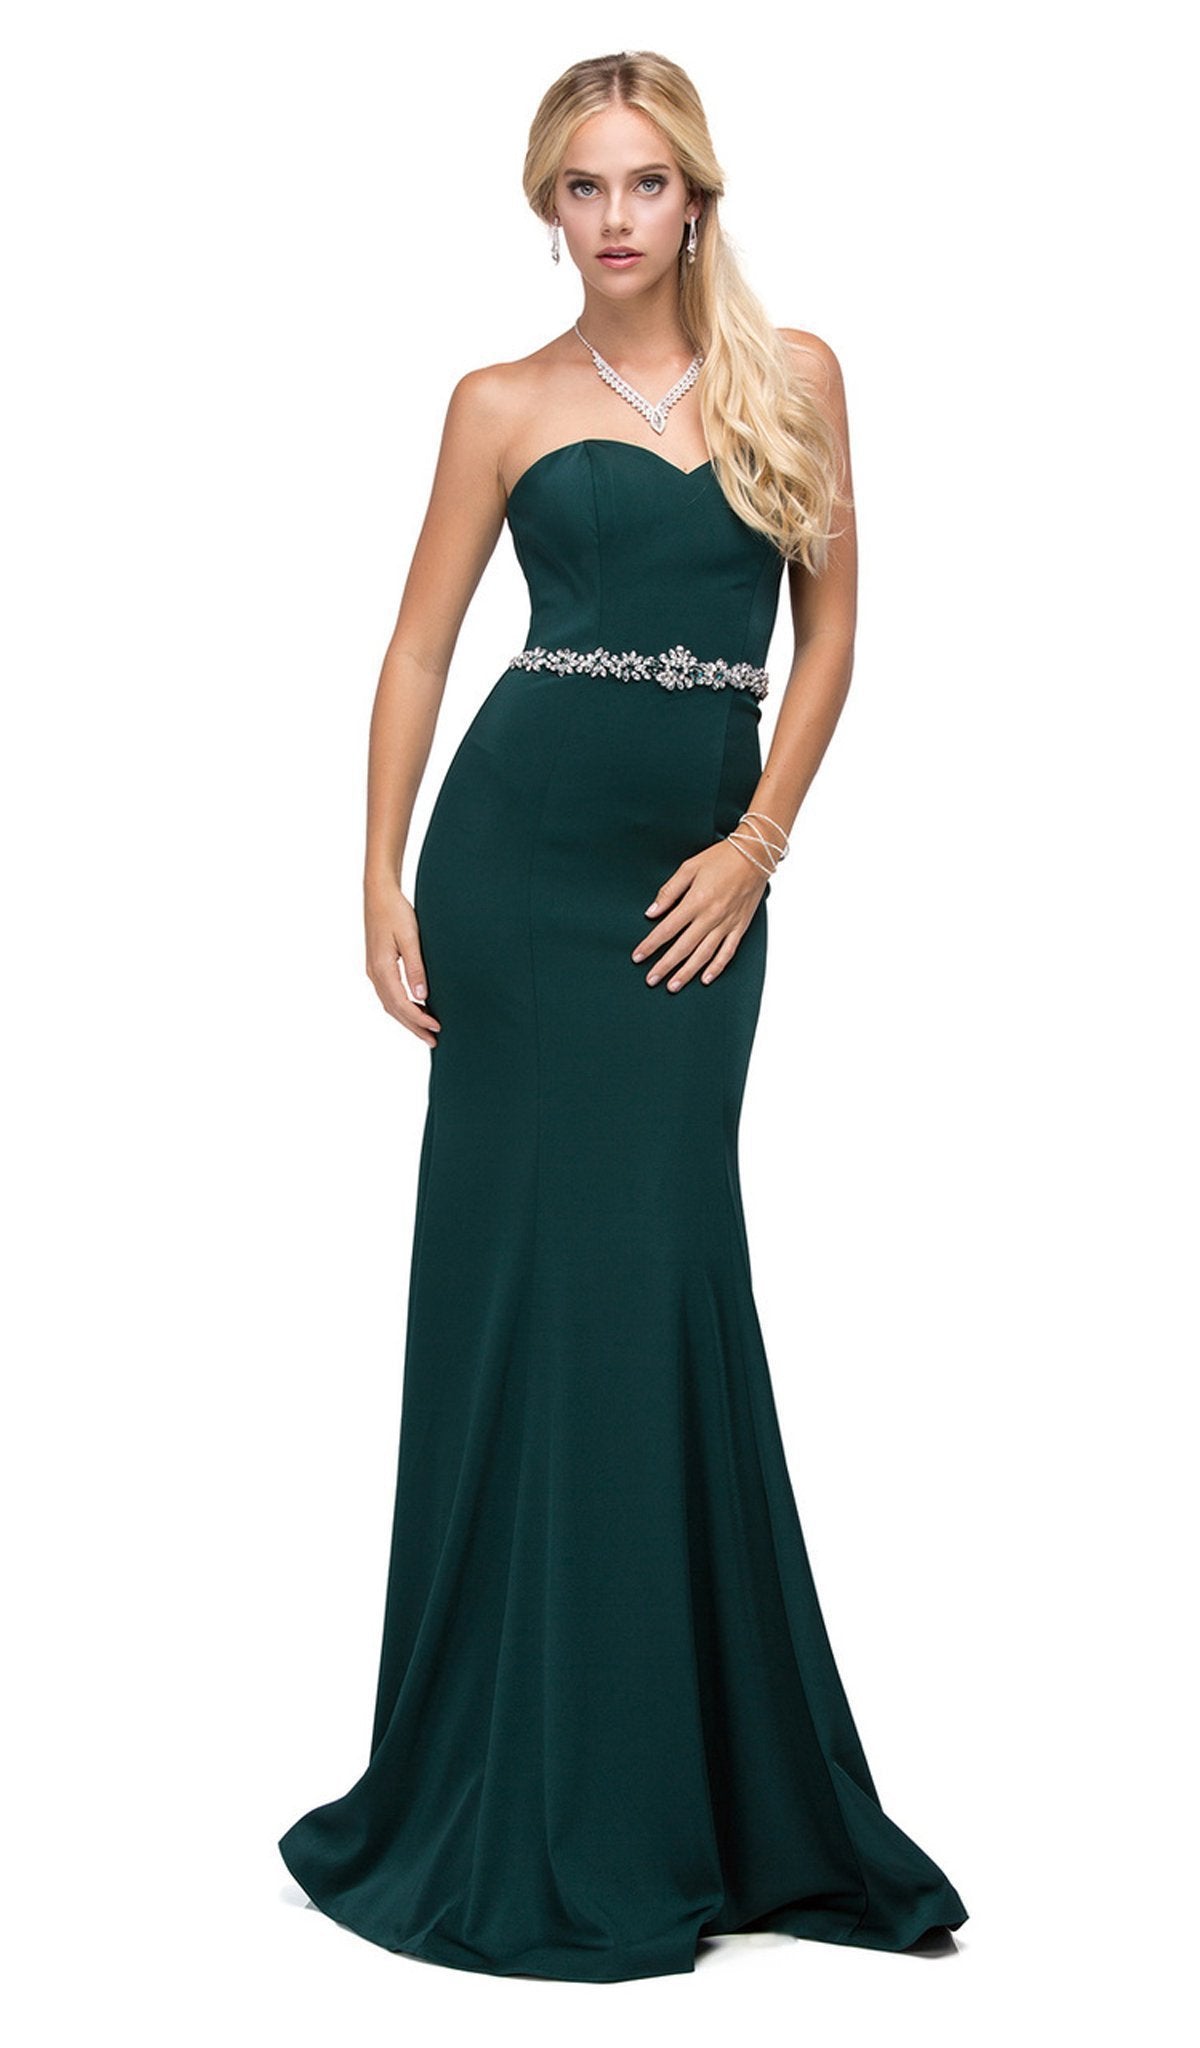 Dancing Queen - 9720 Strapless Sweetheart Beaded Jersey Prom Dress Special Occasion Dress XS / Hunter Green